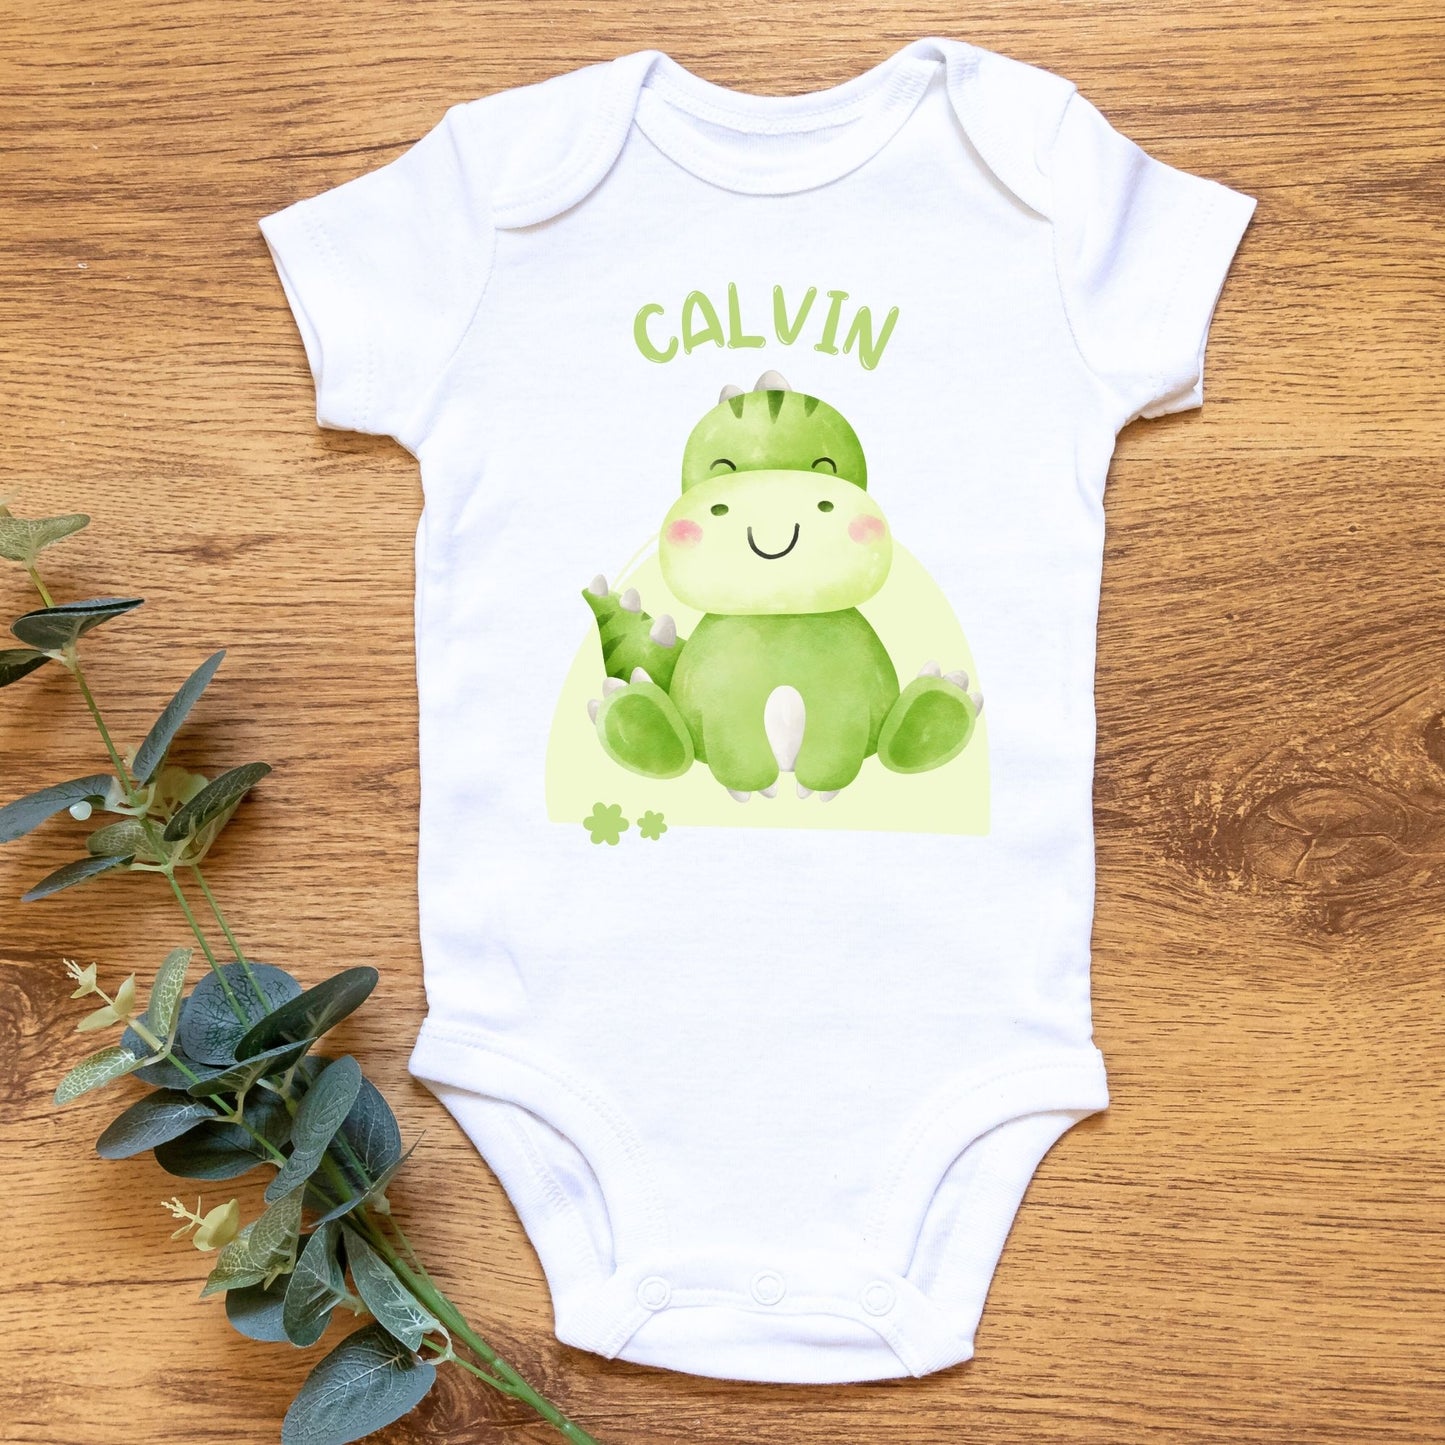 Personalized Name "Dino Buddy" Baby Romper